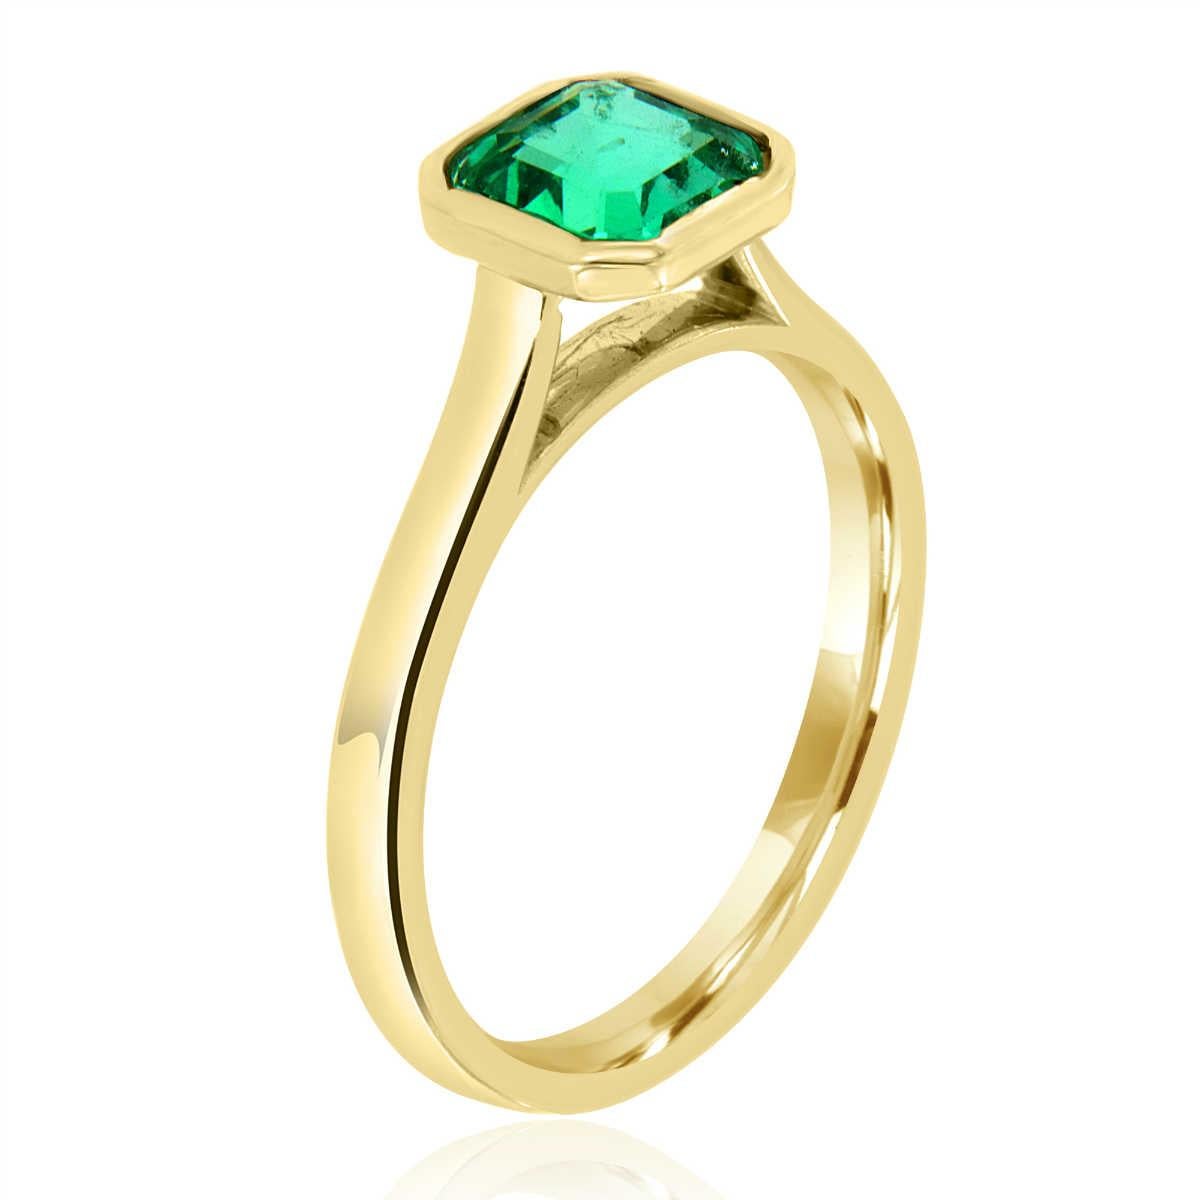 This classic and delicate solitaire features an Asscher cut 1.20-carat green emerald set in a thin bezel to bring up its natural beauty. Experience the difference in person!

Product details: 

Center Gemstone Type: Emerald
Center Gemstone Carat